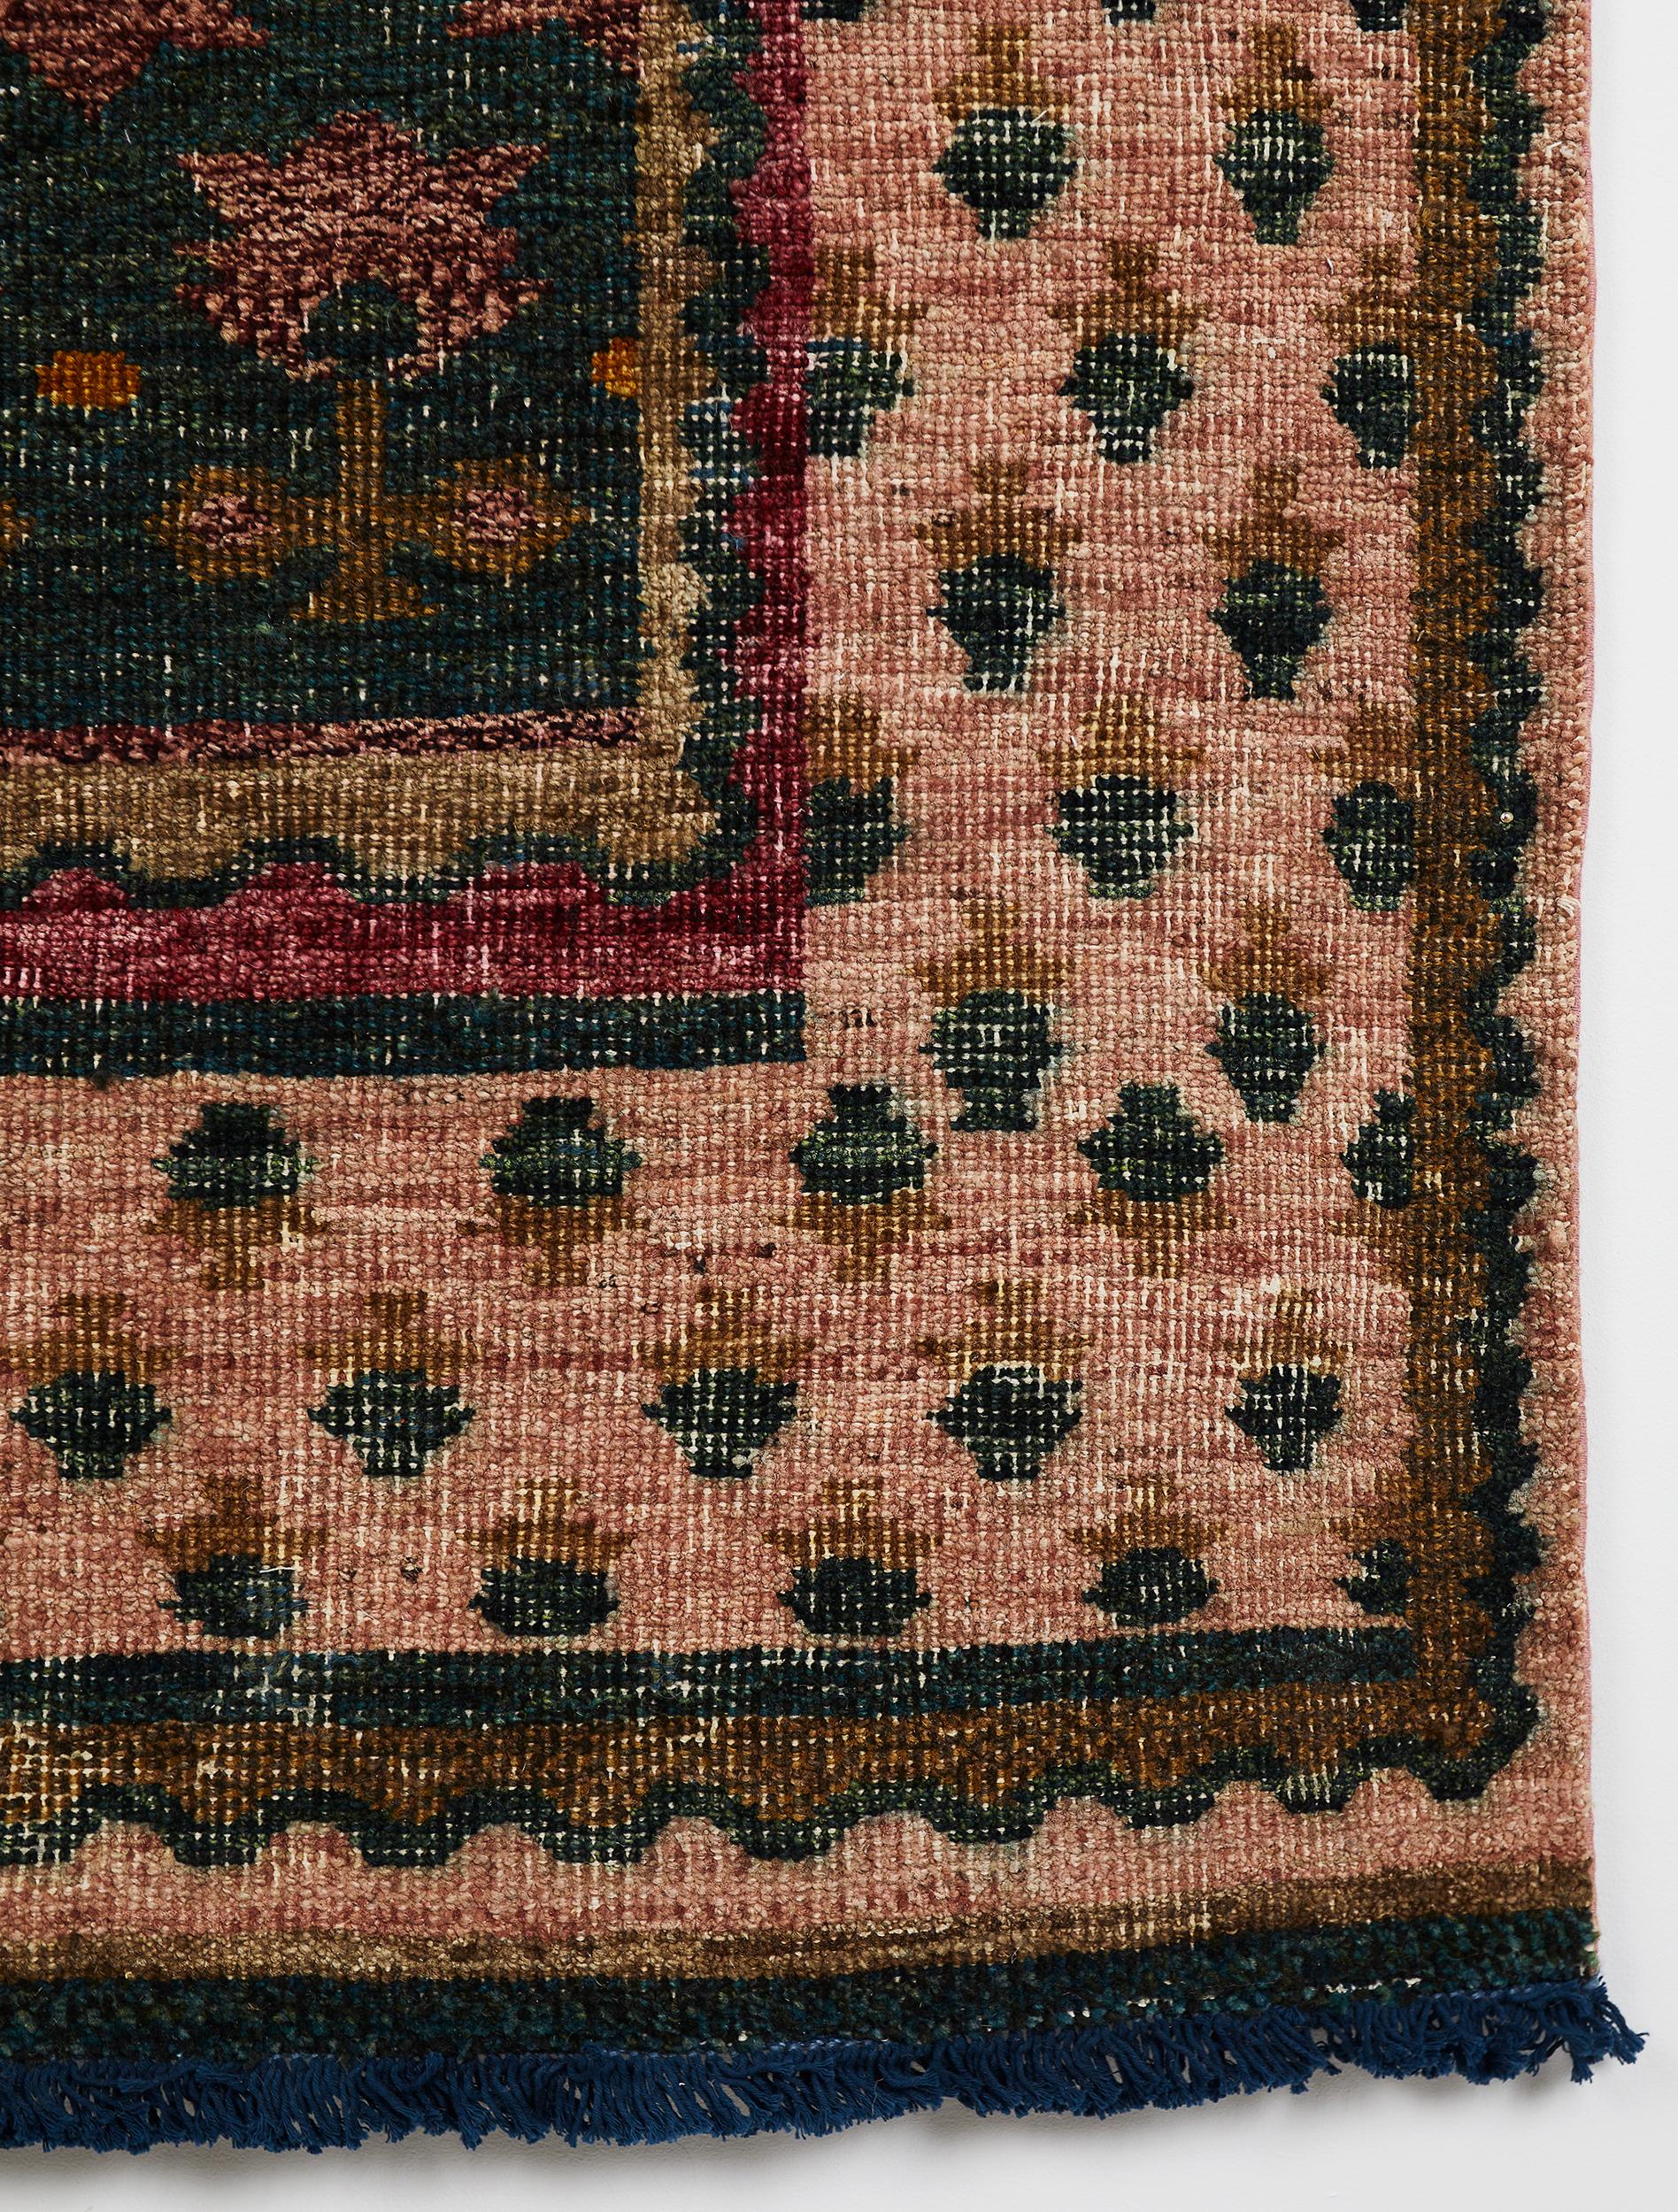 when was the first carpet made